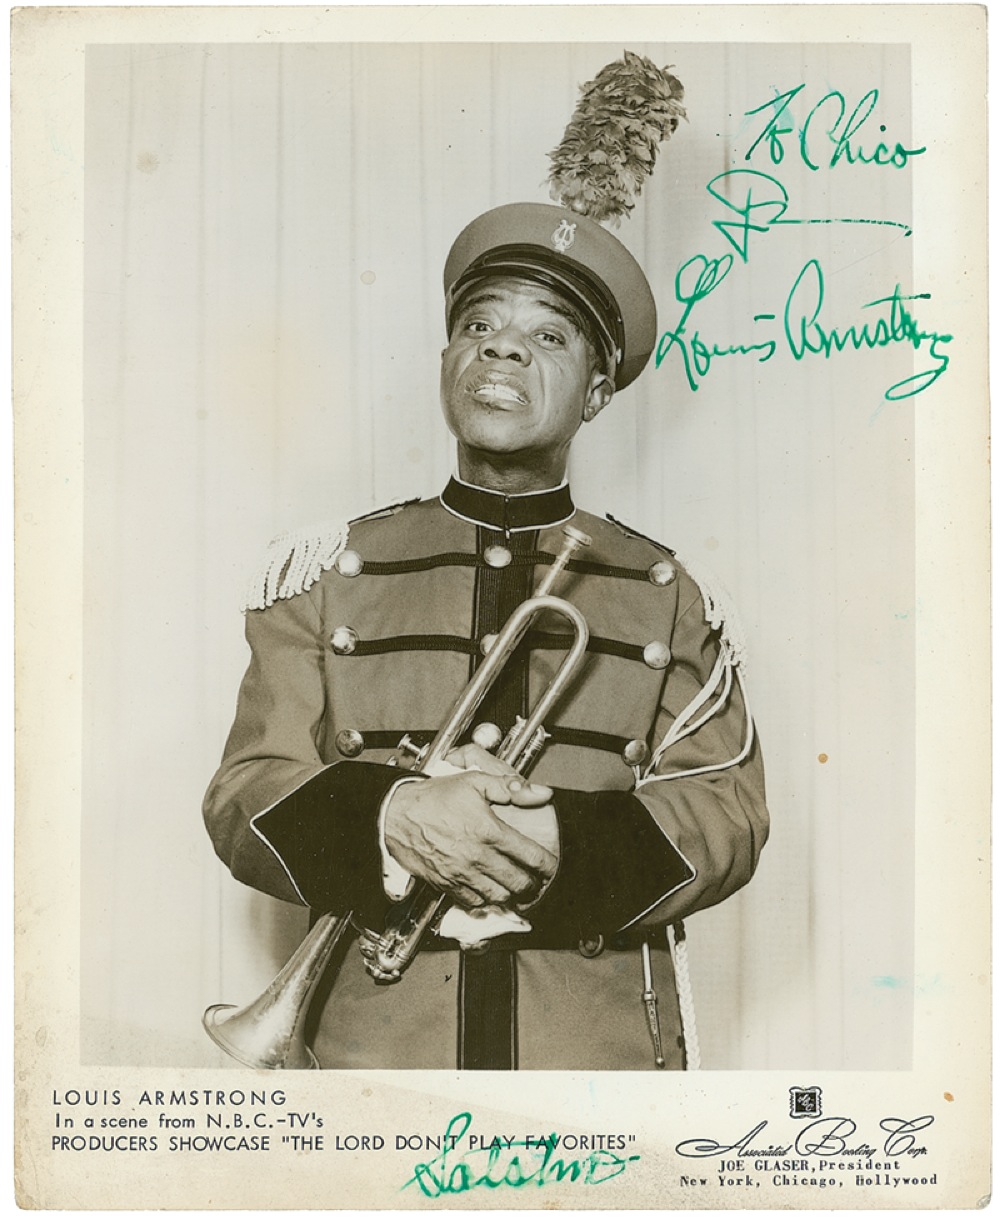 Lot #744 Louis Armstrong